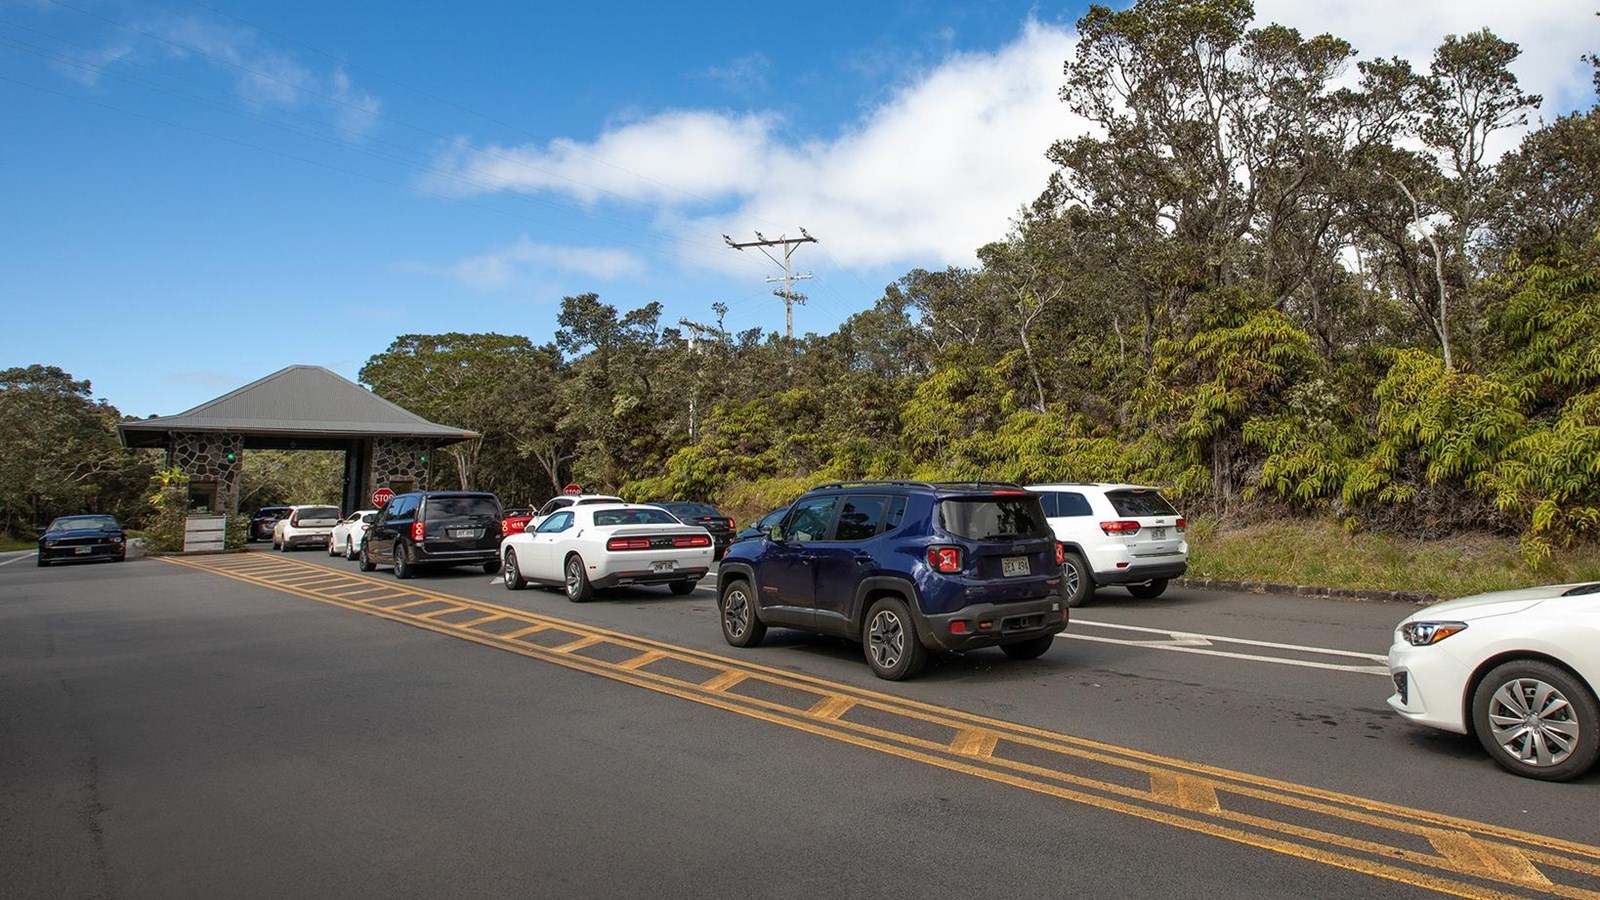 A line of cars waiting to enter the national park.